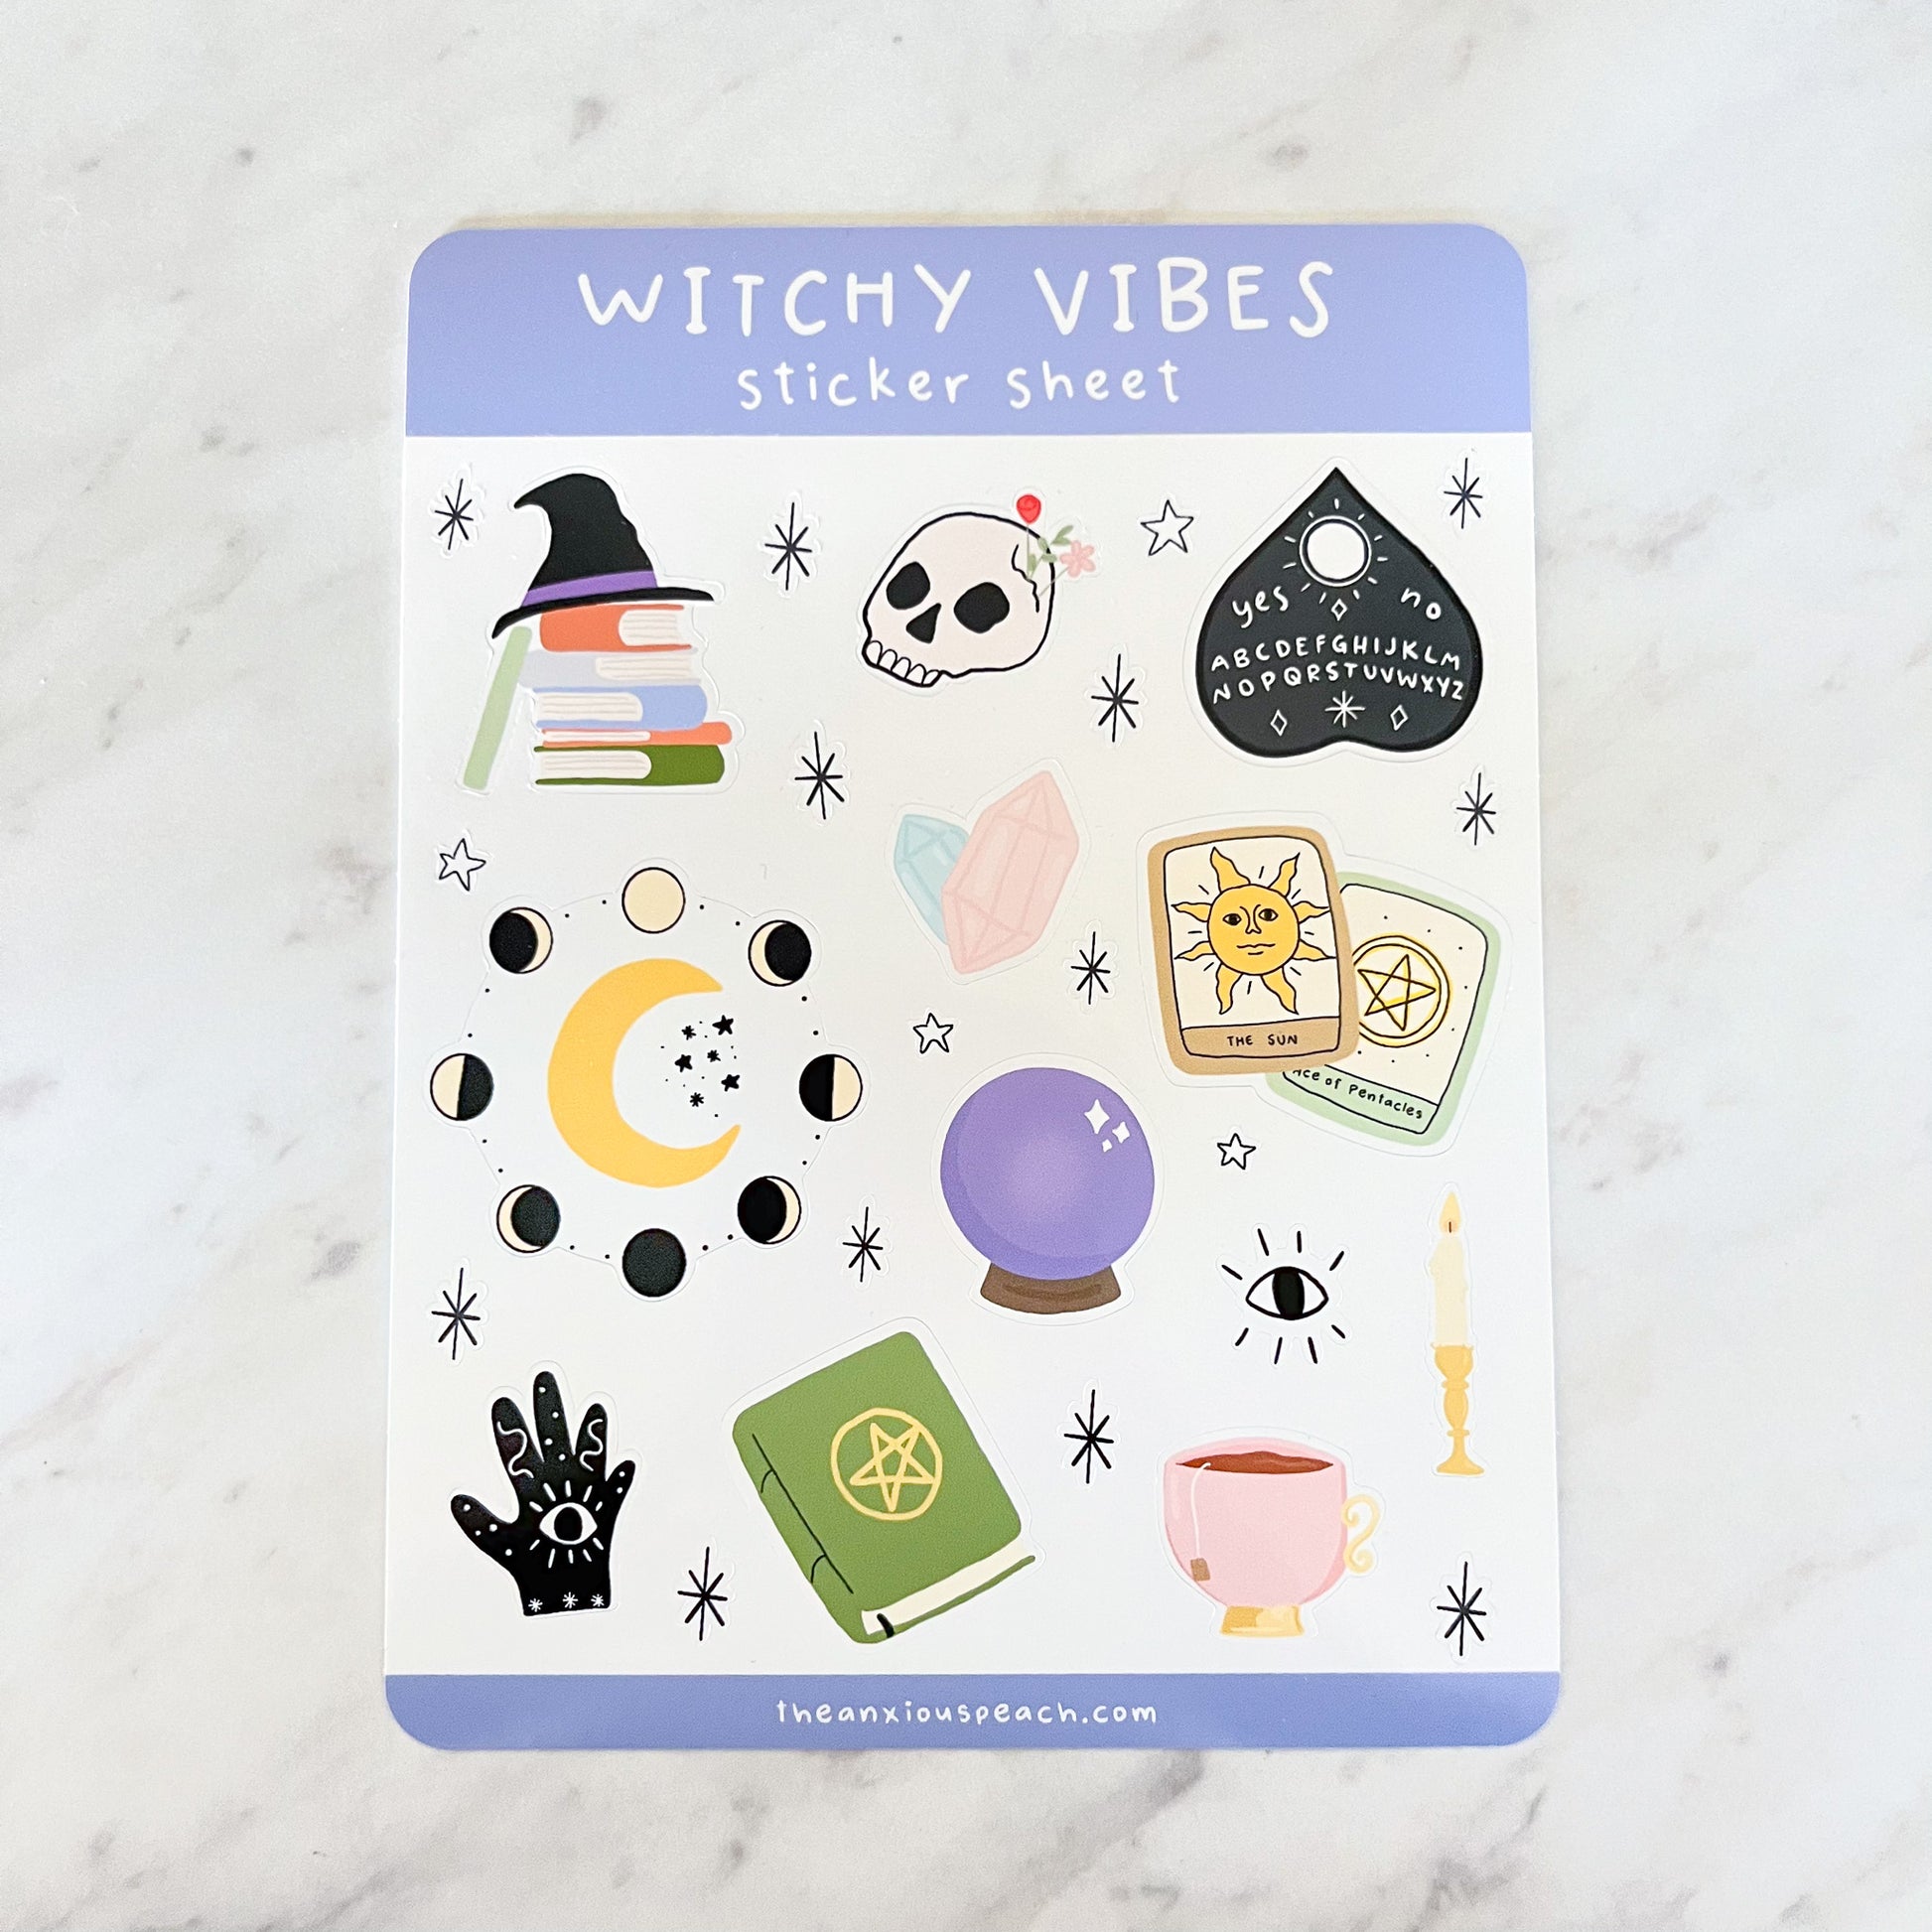 Witchy Vibes Sticker Sheet  The Anxious Peach – the anxious peach